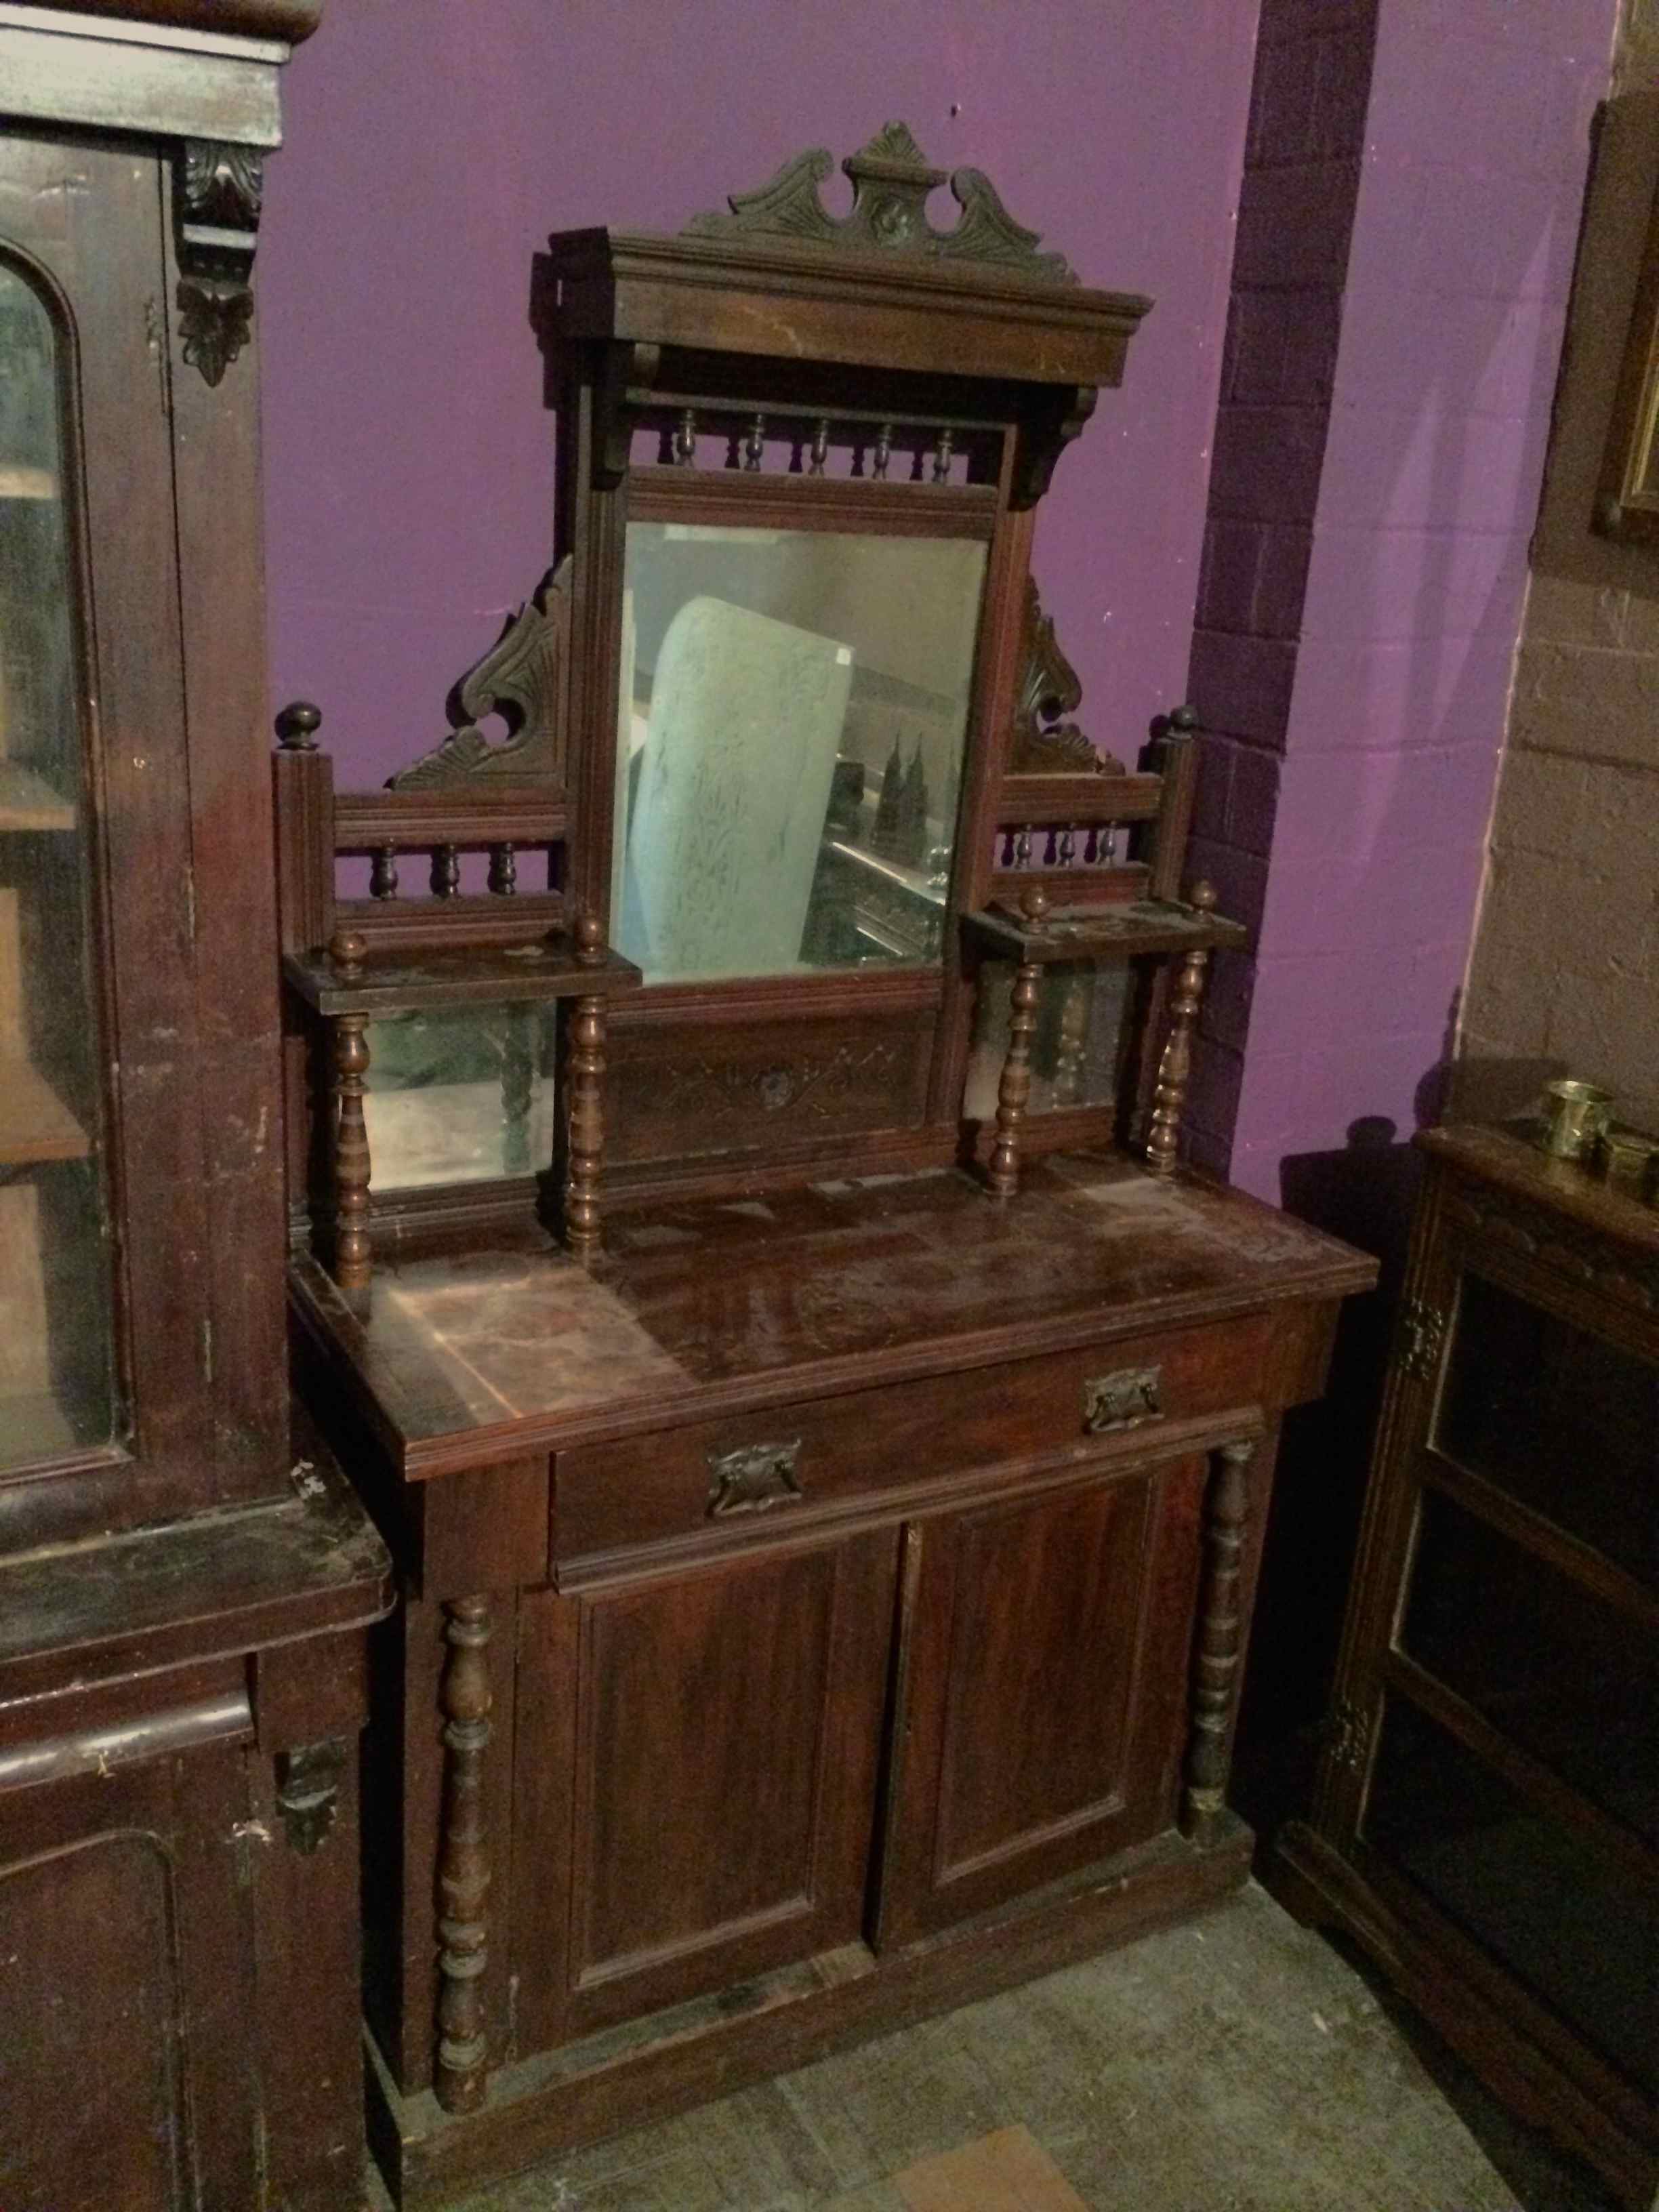 Chiffonier Cir 1900 with turned spindles and shelves.